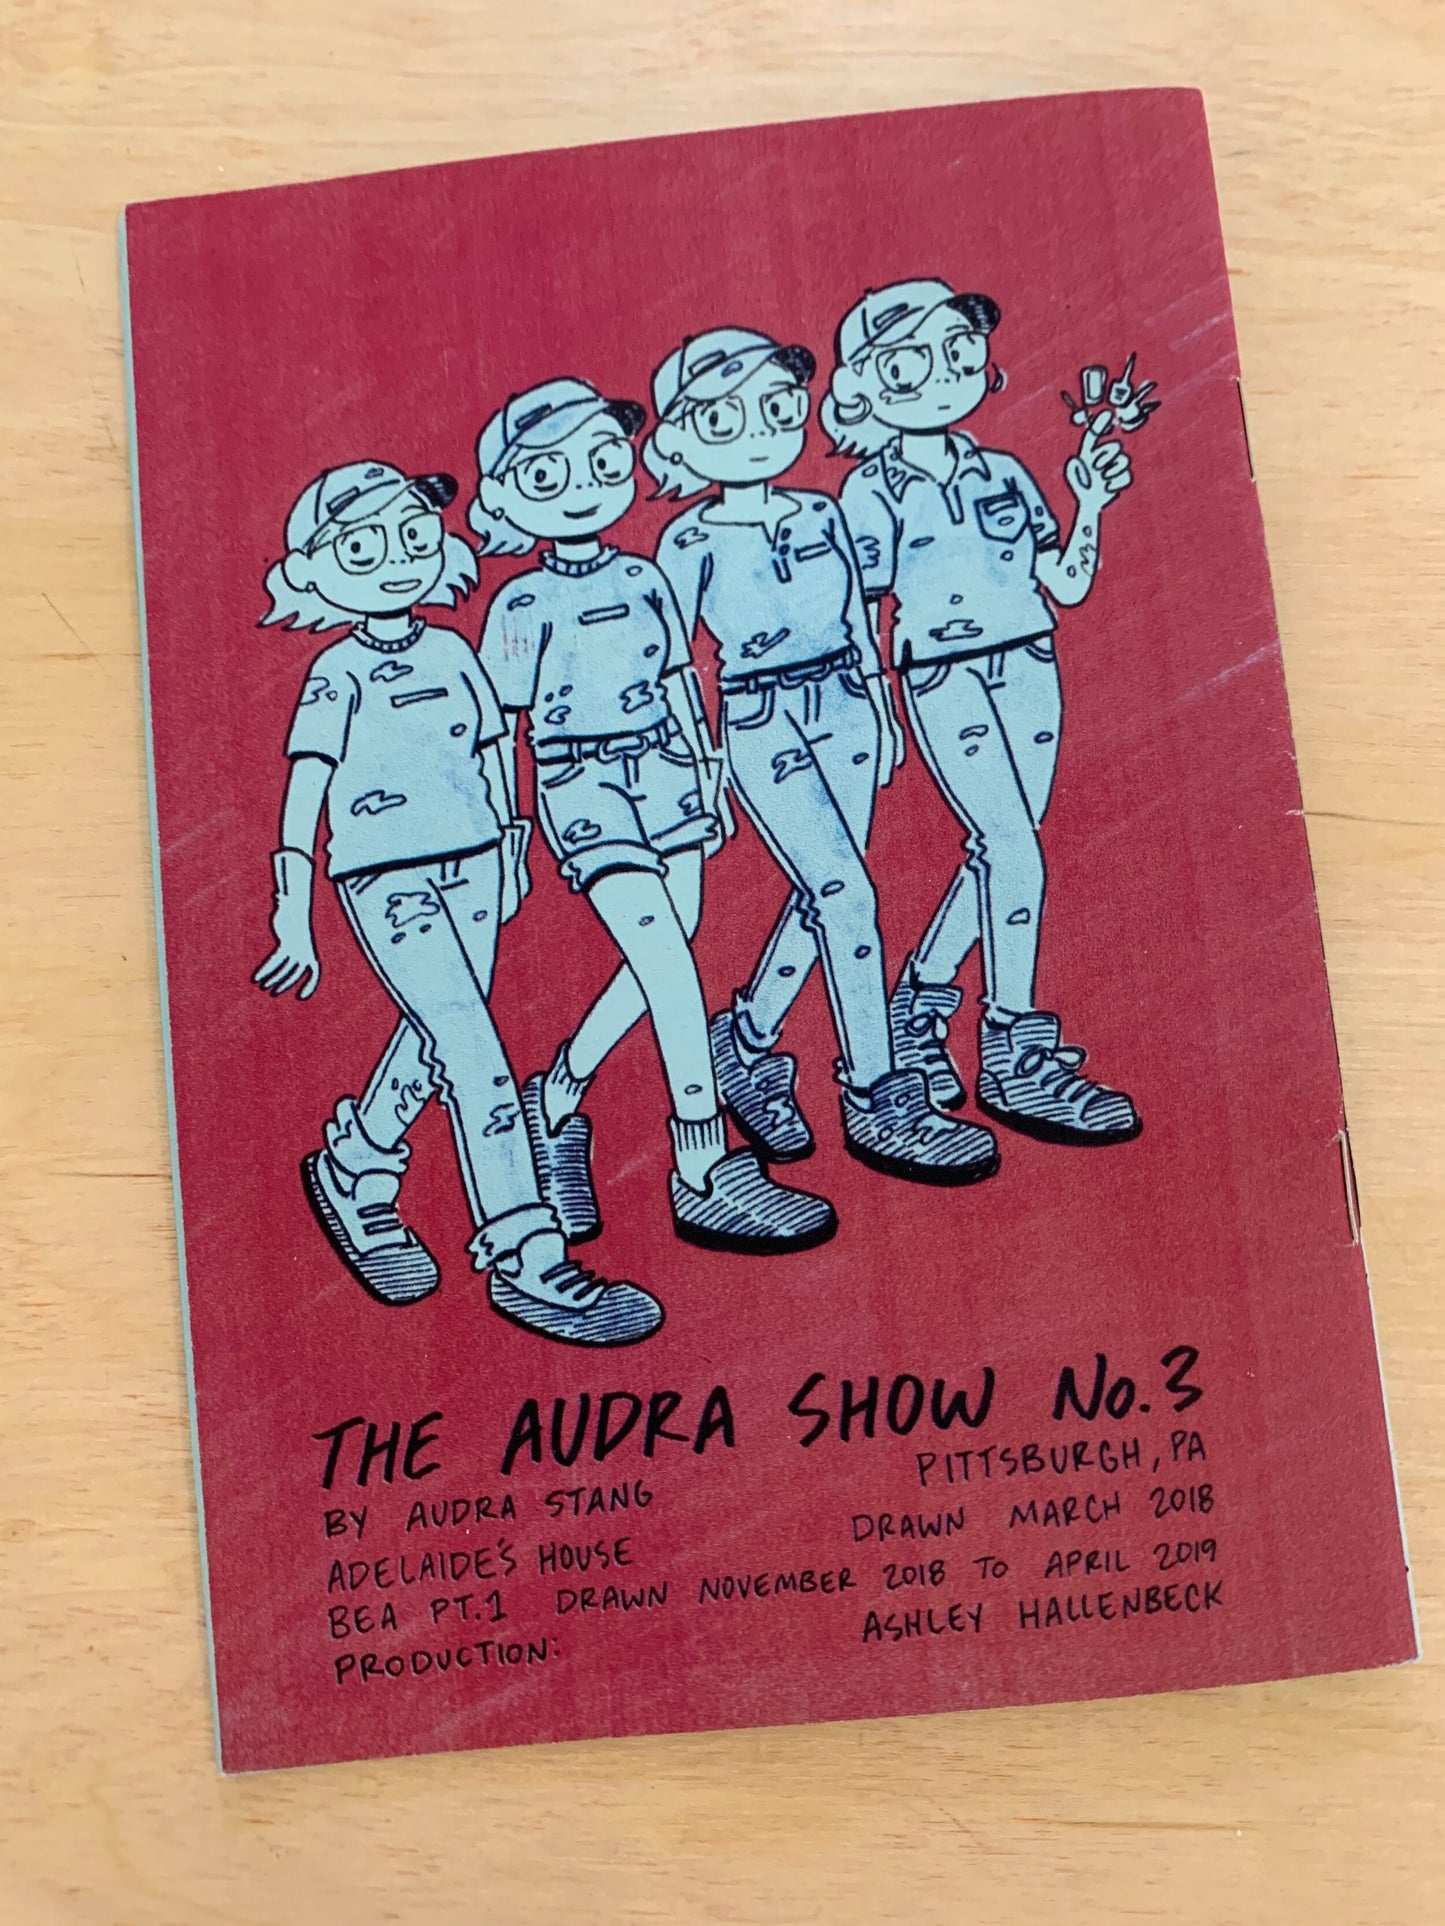 The Audra Show #3